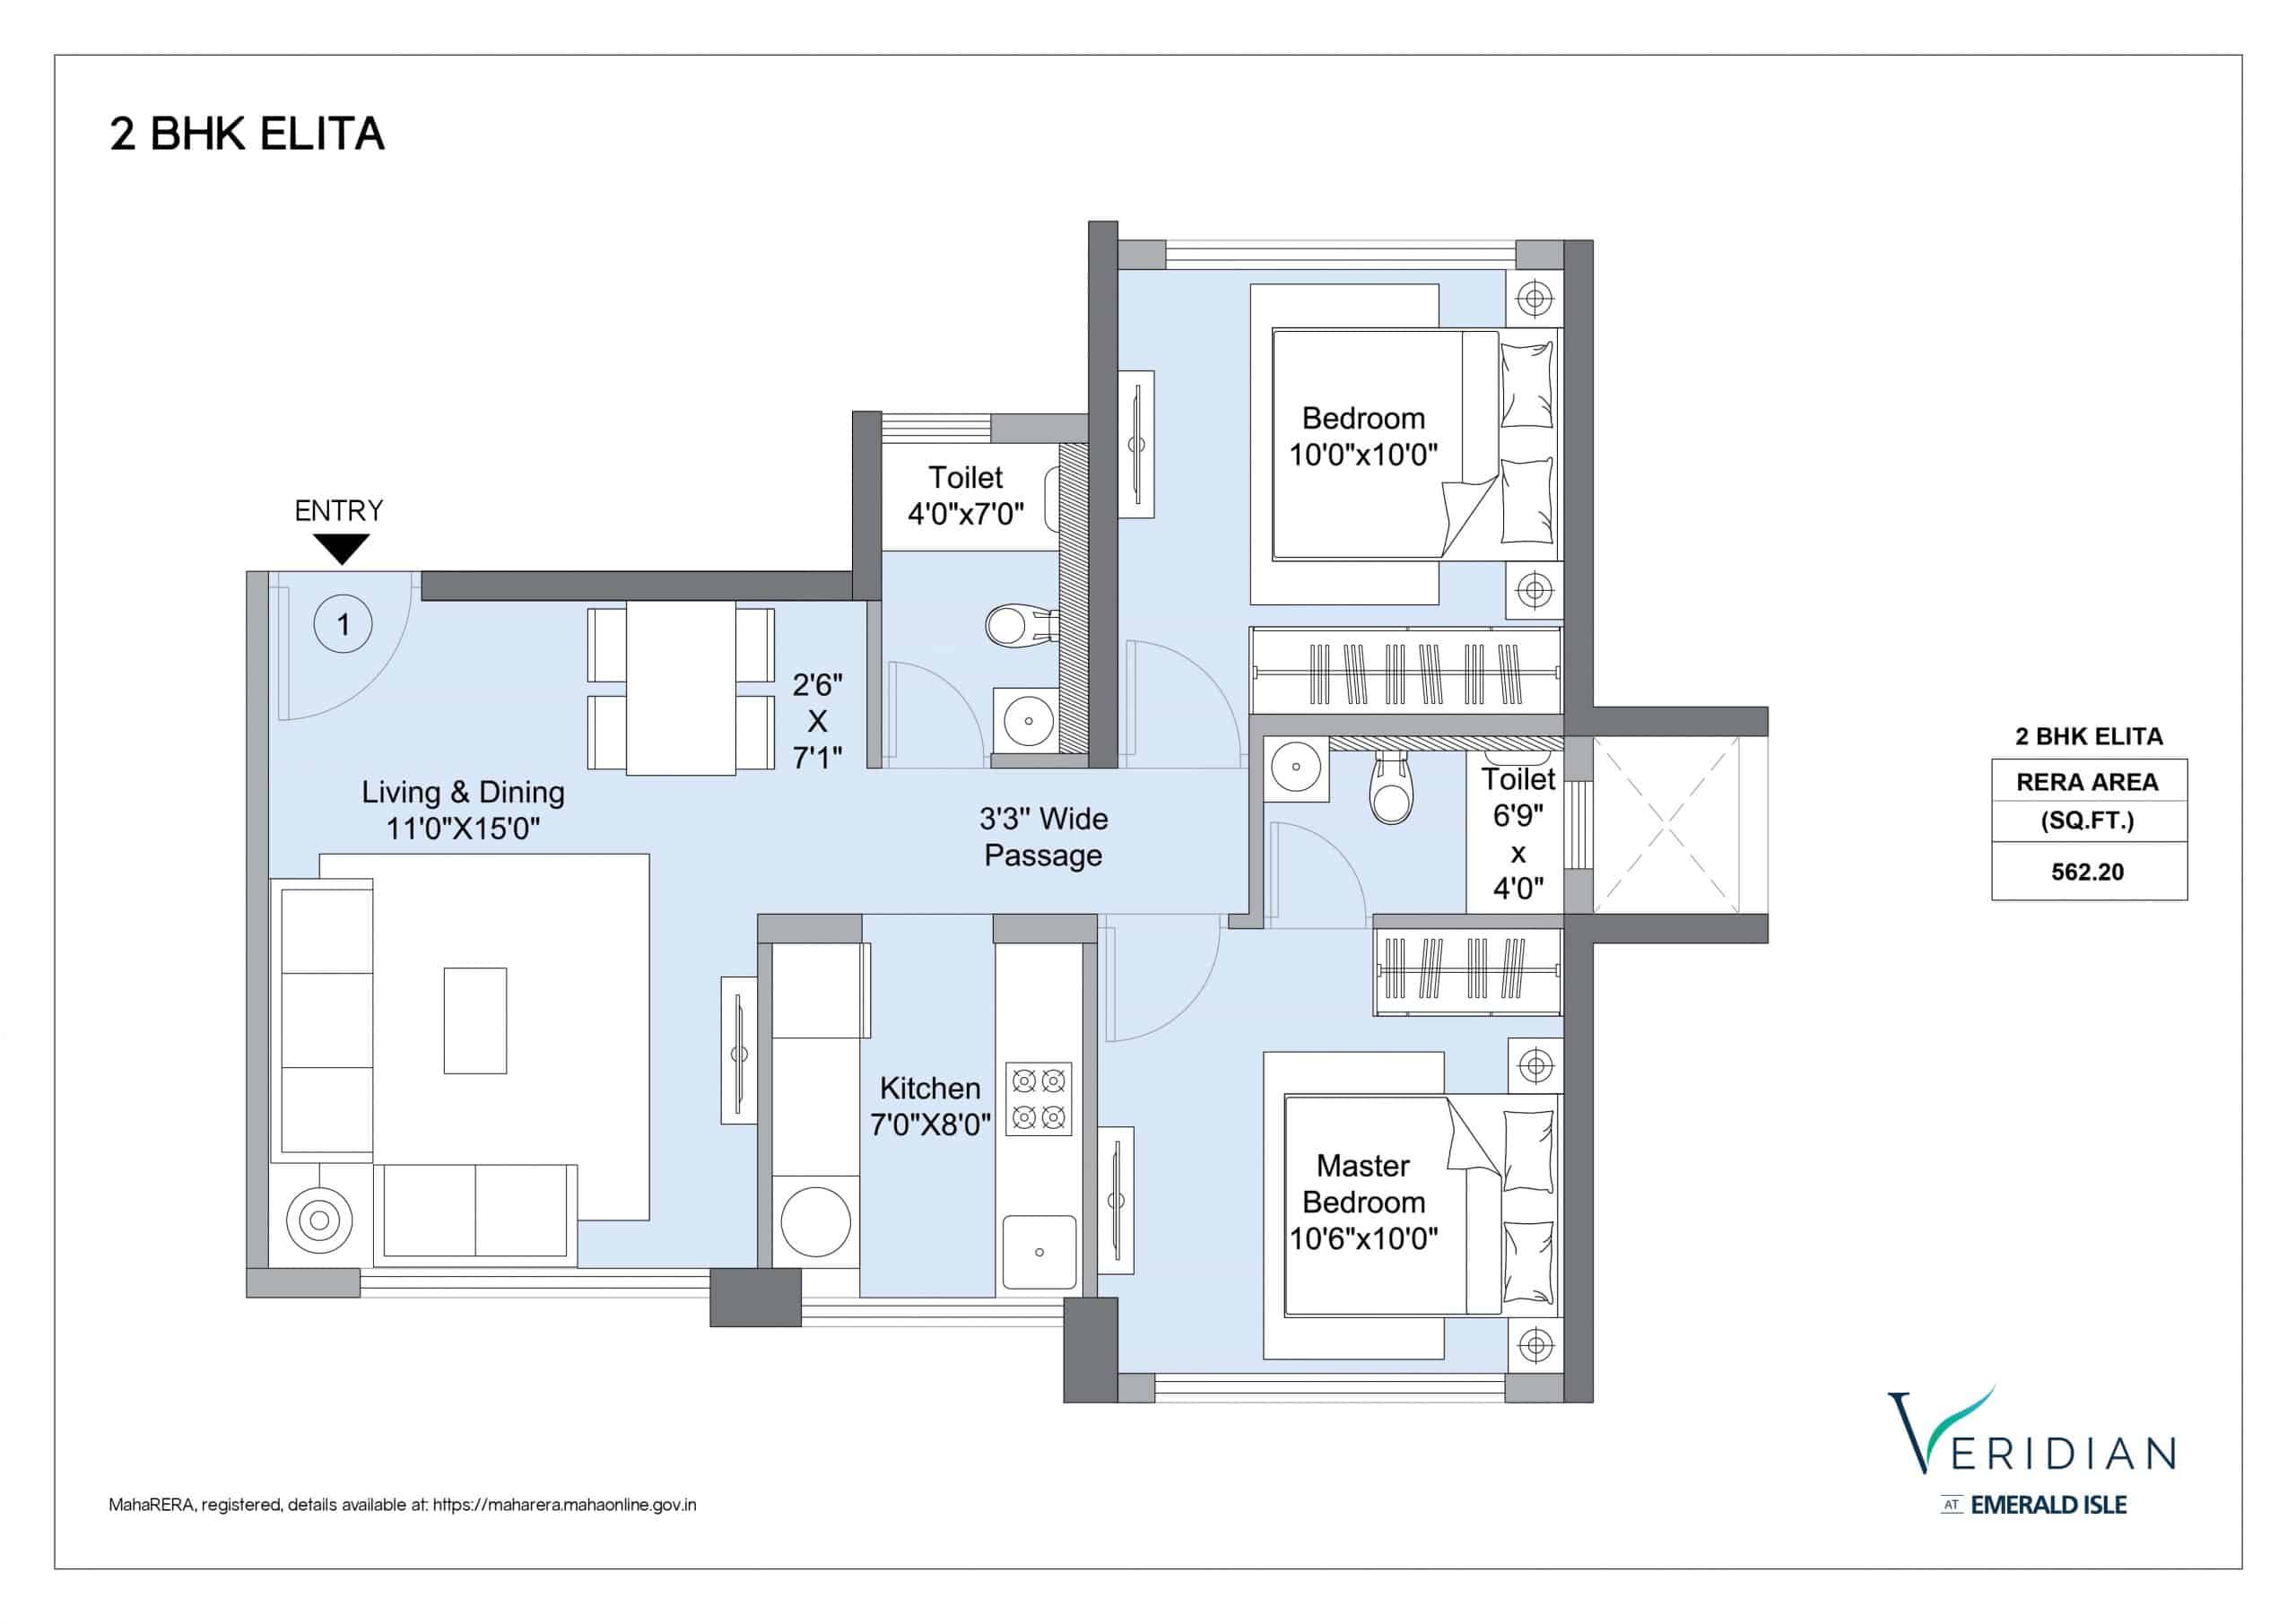 2 BHK Elita at Veridian scaled | L&T Realty